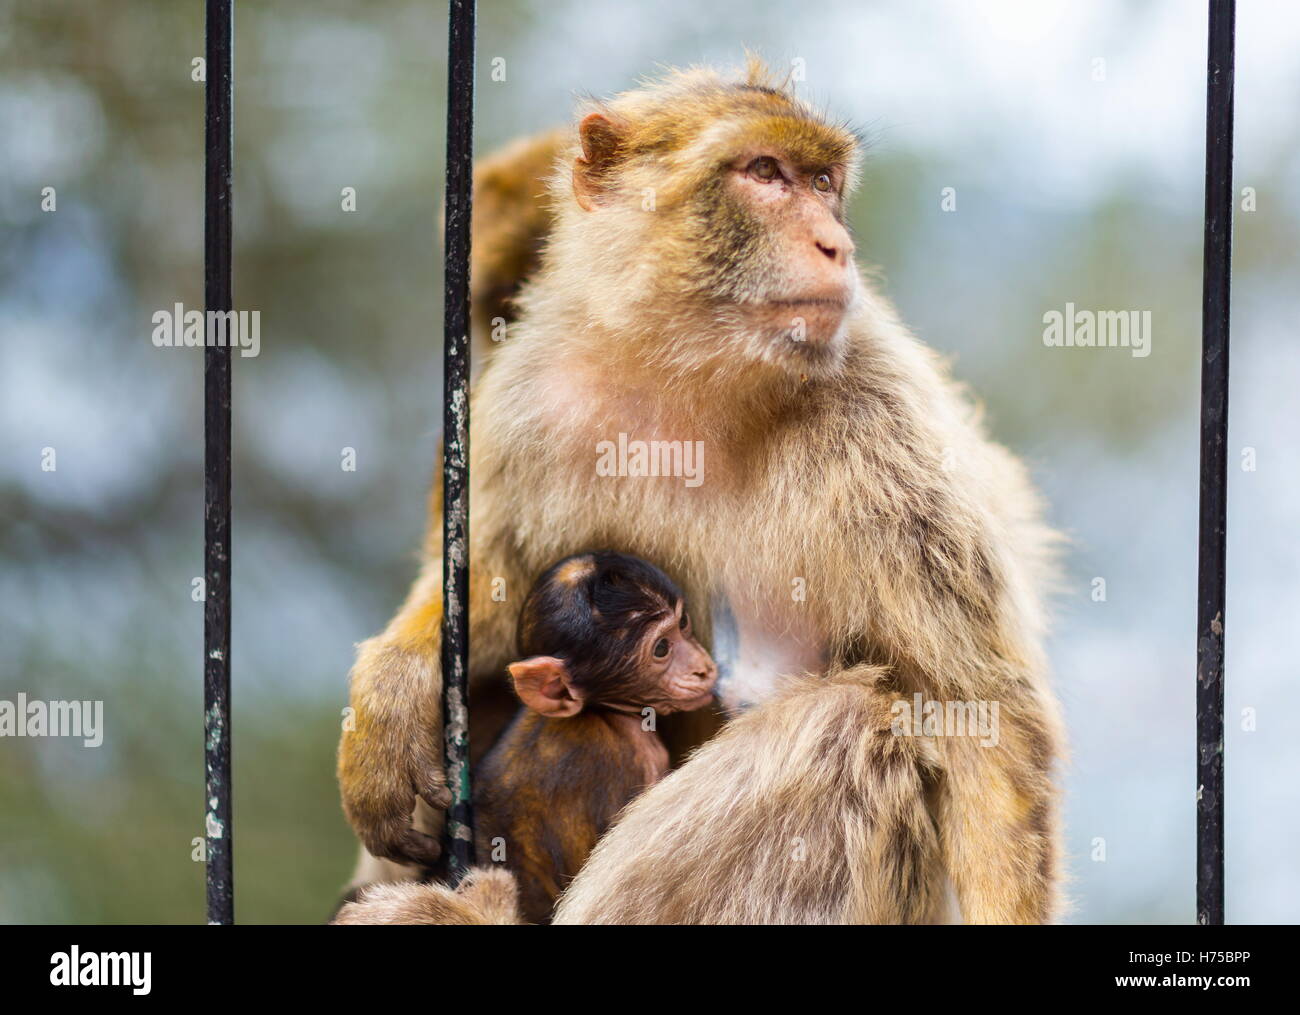 The Barbary macaque population in Gibraltar an the only wild monkey population in the European continent. Stock Photo